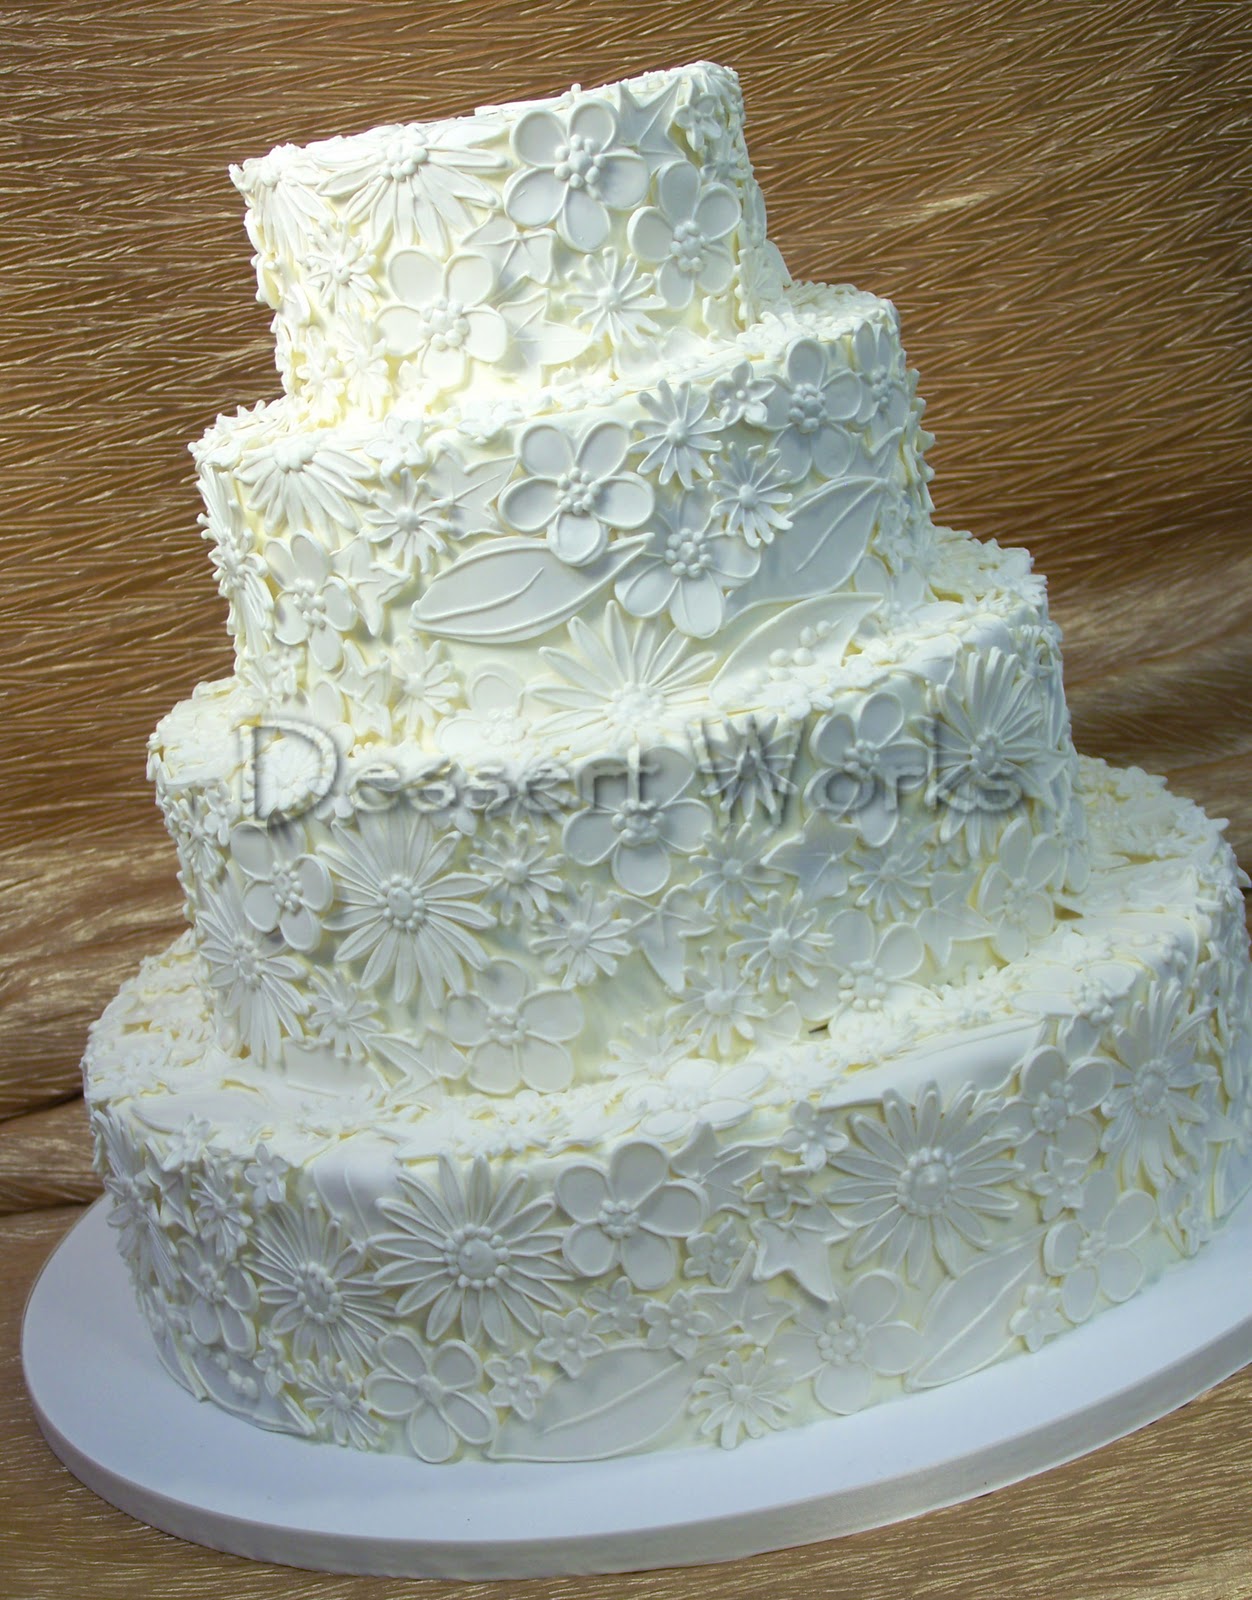 traditional wedding cake with flowers Posted by Jacqueline M at 8:51 AM 1 comment: